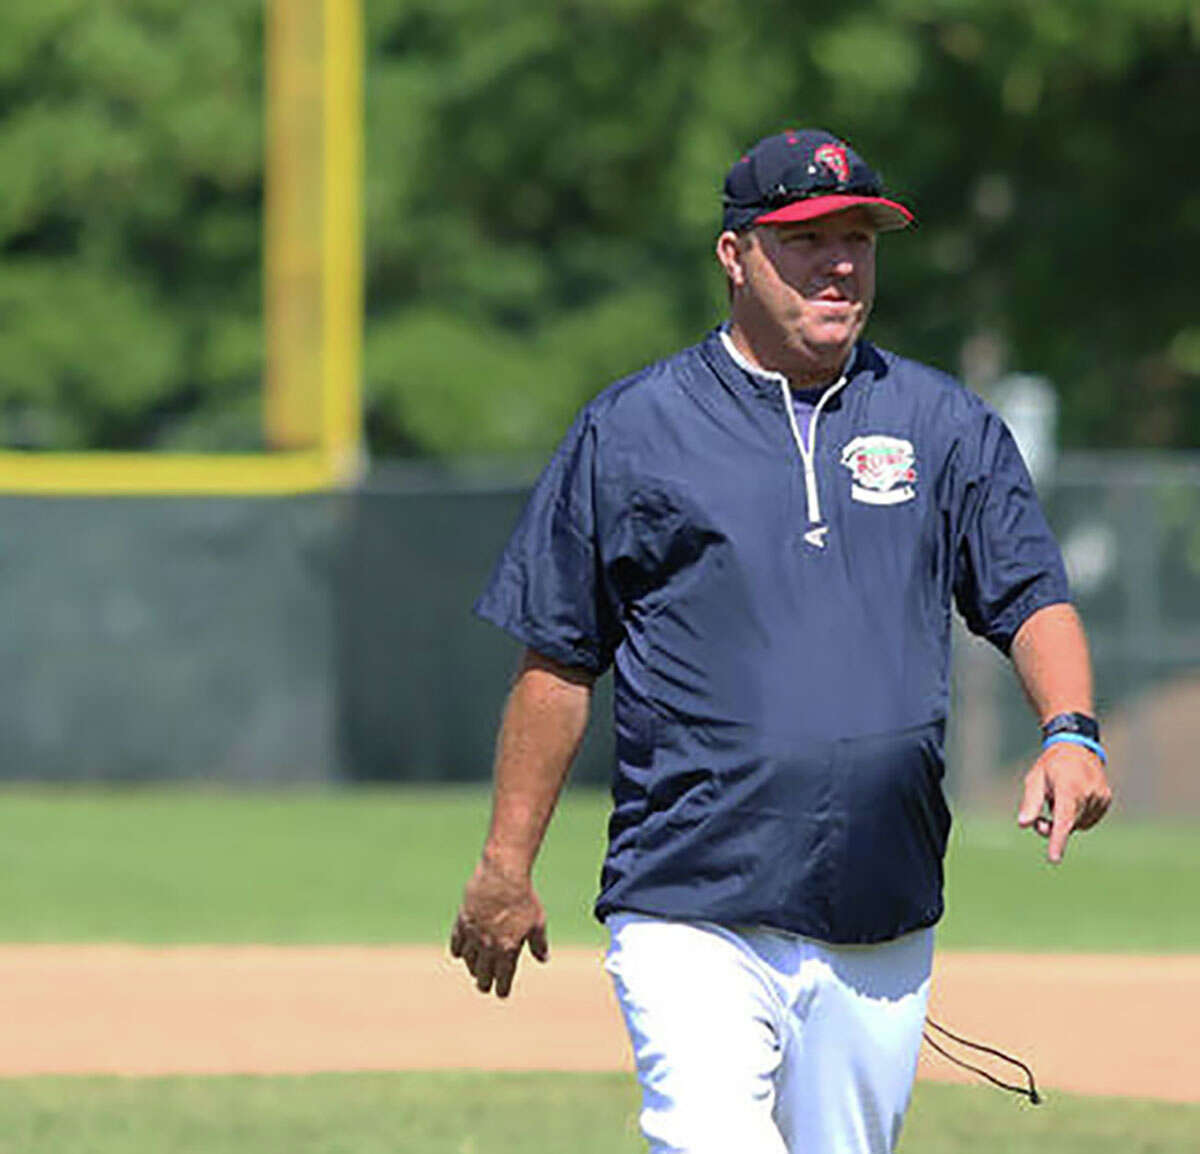 Alton Post 126 manager Doug Booten's team lost to Washington, Missouri in Sunday's semifinals of the Baseball BATtles Cancer Tournament at the Ballwin Athletic Association Complex.